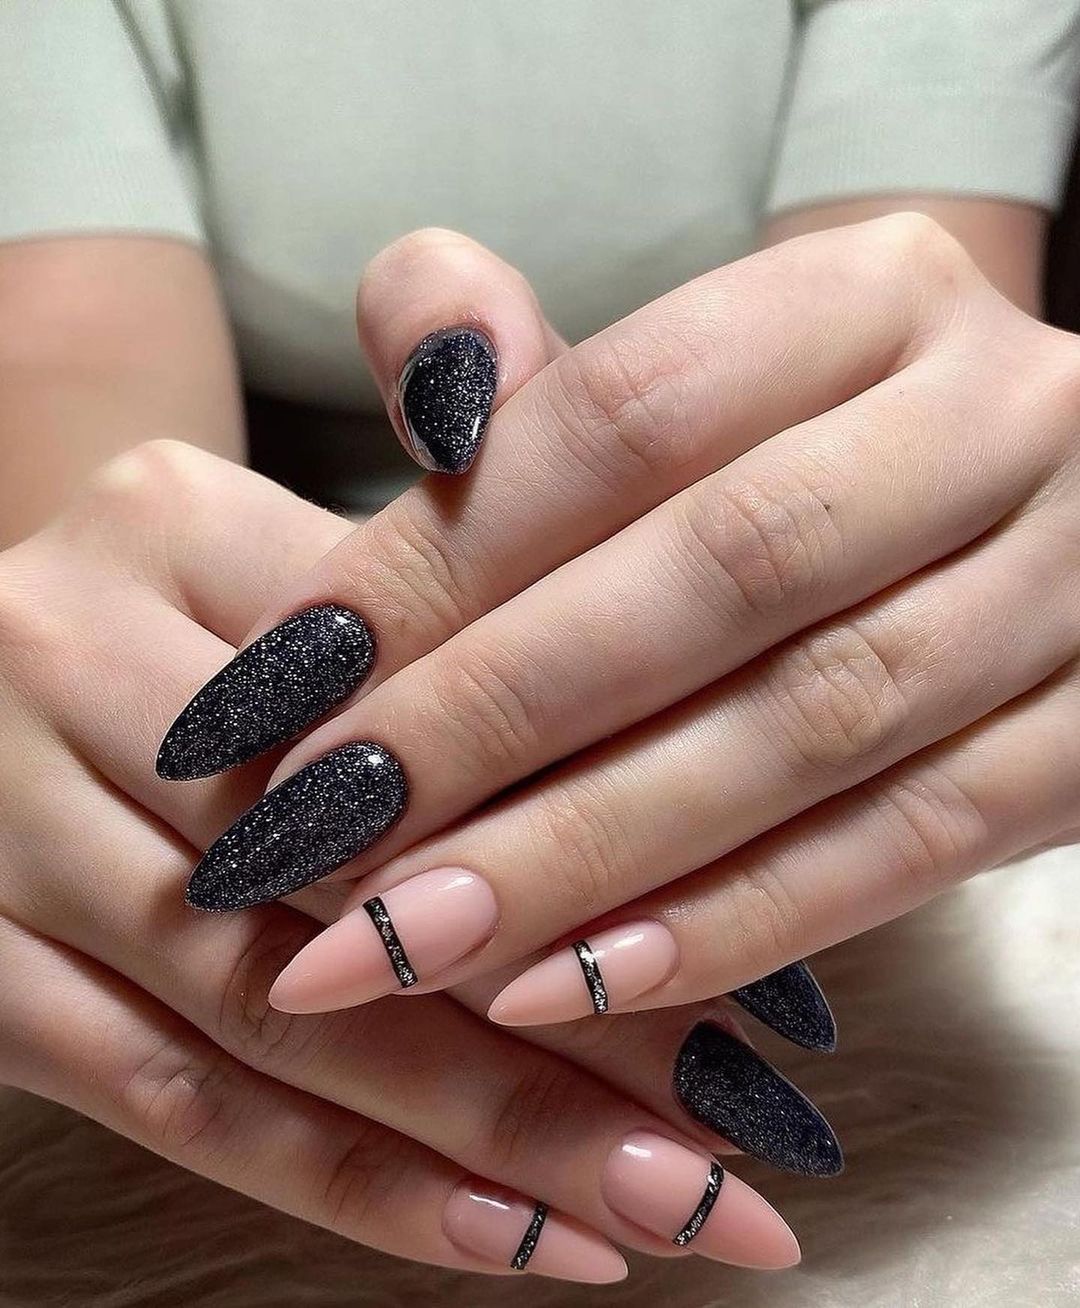 30 Easy Nails & Nail Art Designs To Try In 2022 images 6